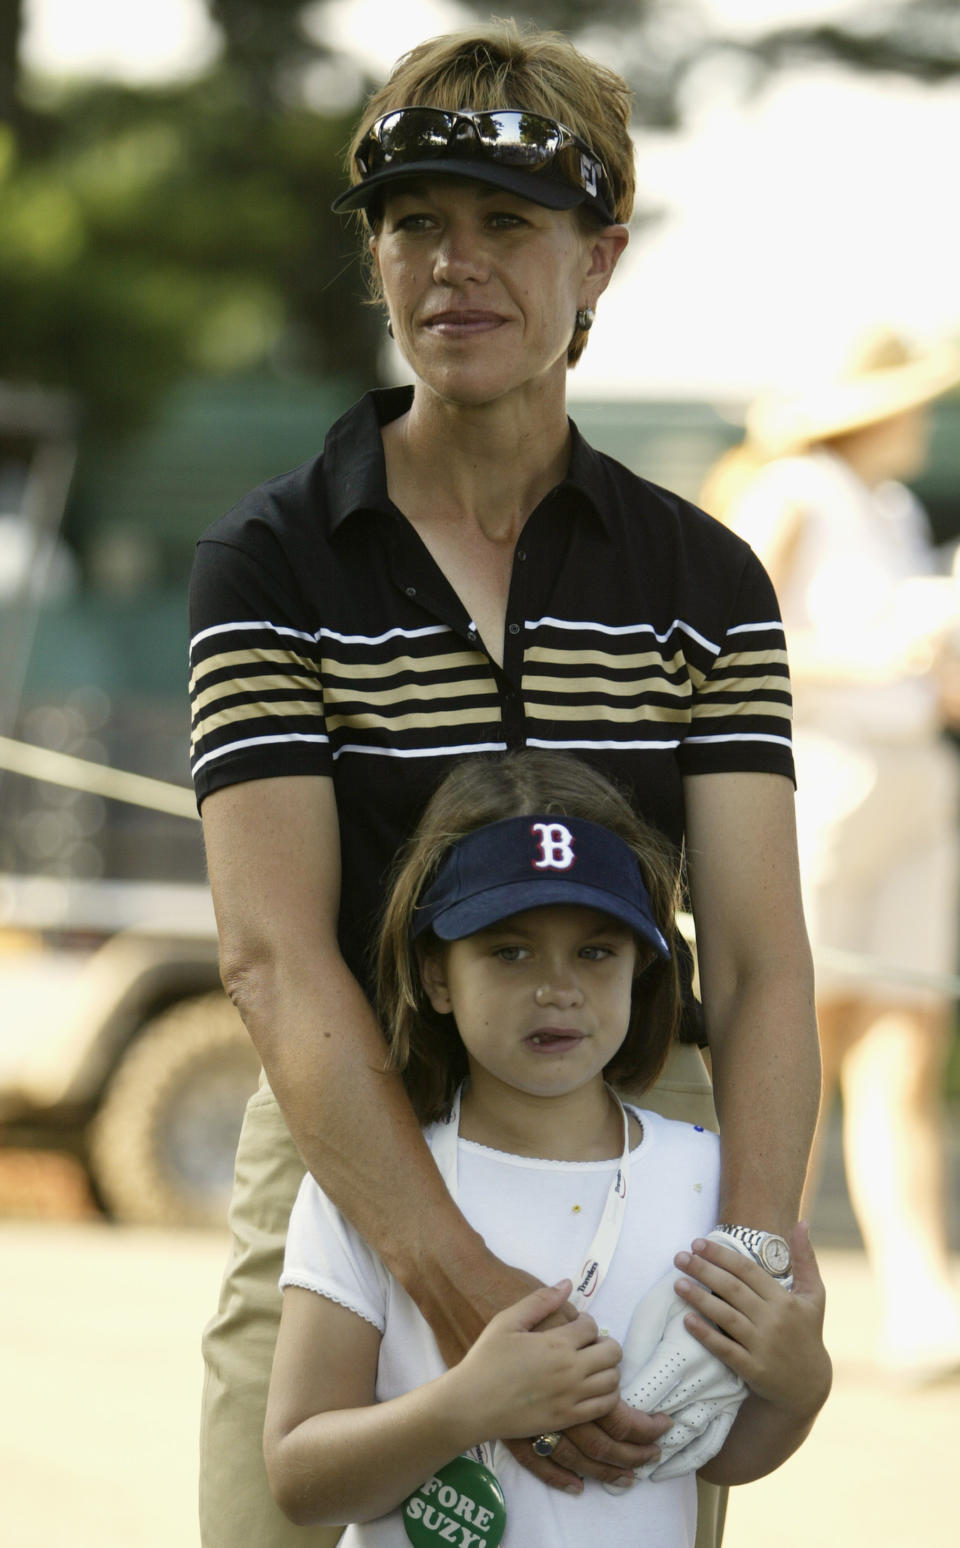 Suzy Whaley stands with her daughter Jennifer before she tees off at the start of the second round of the Greater Hartford Open on July 25, 2003 at TPC at River Highlands in Cromwell, Connecticut. (Photo by Elsa/Getty Images)